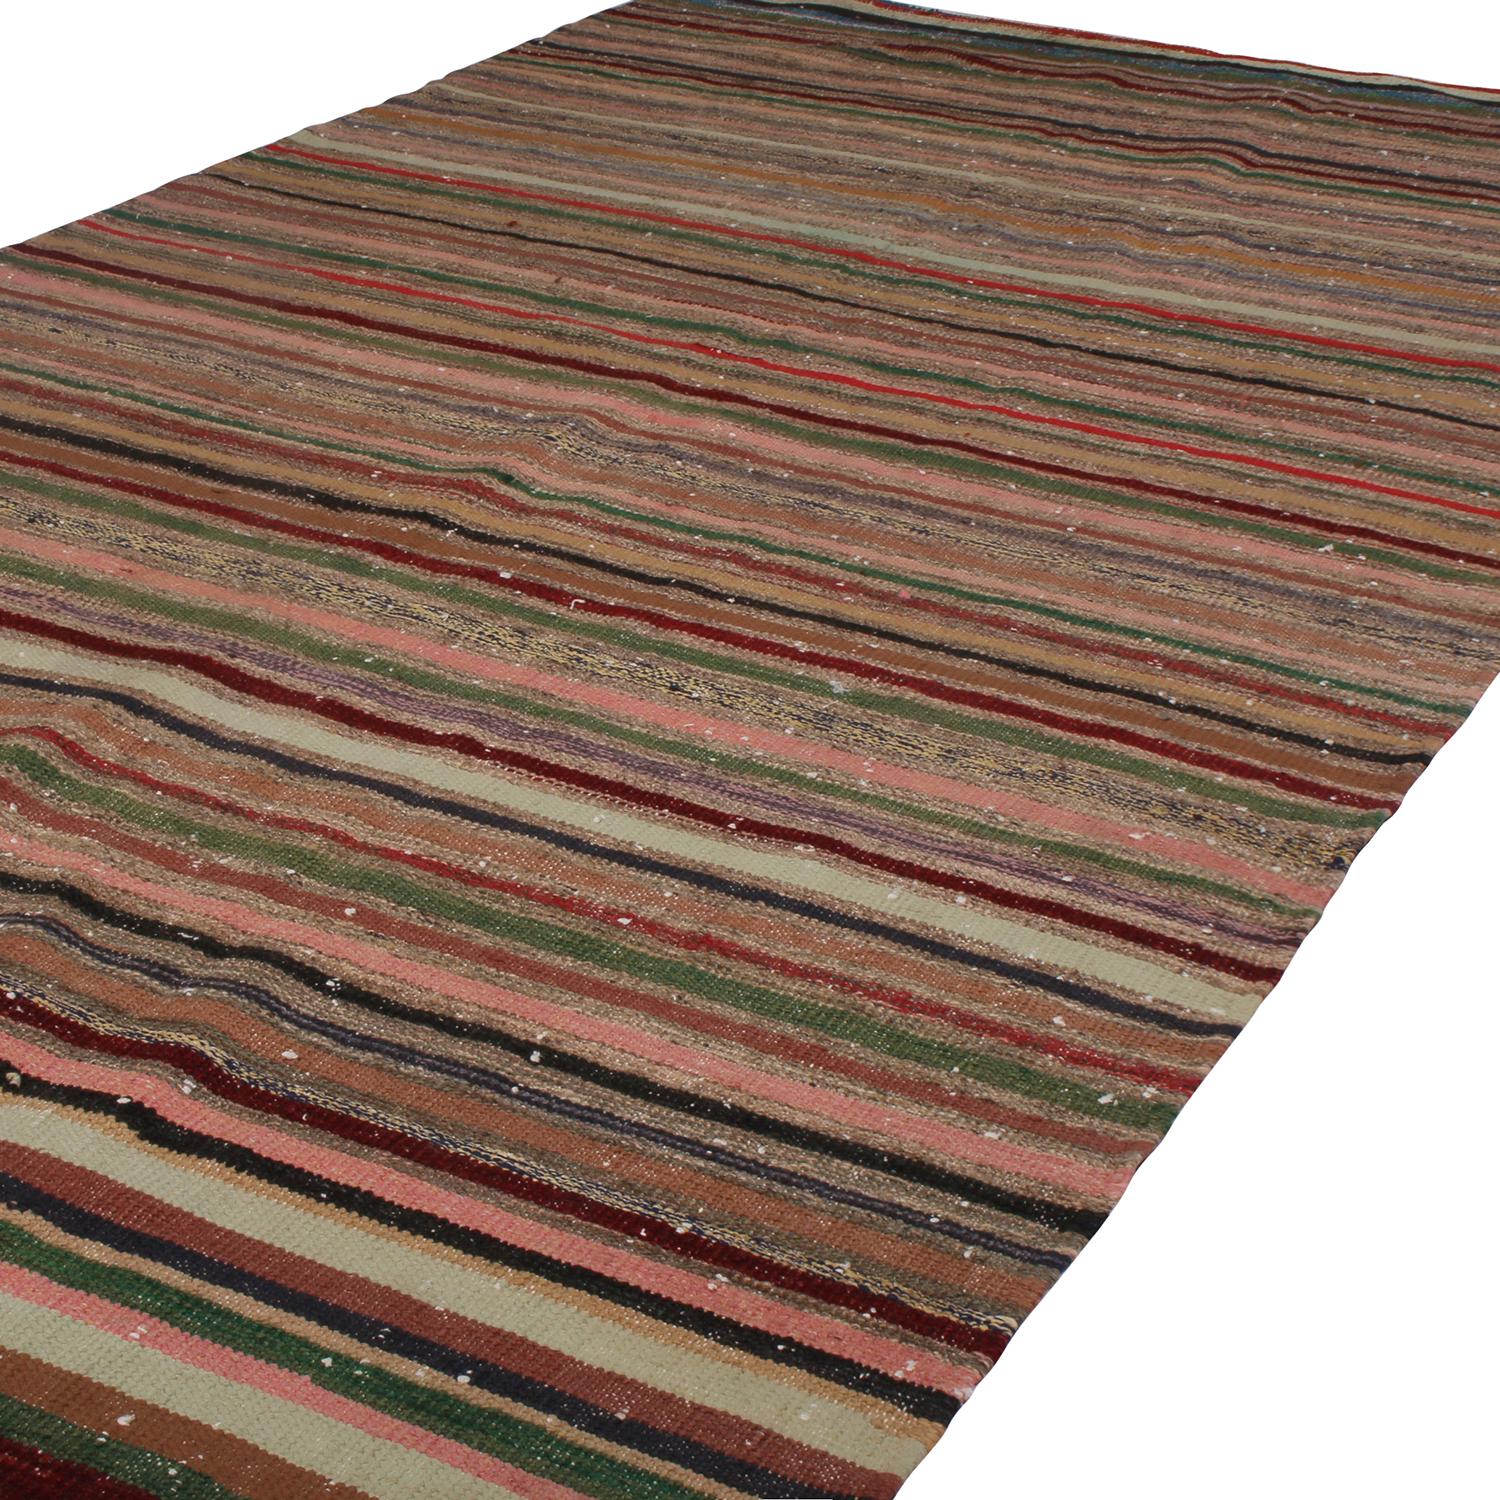 Handwoven in Turkey originating between 1970-1980, this vintage wool kilim rug enjoys a play of subtle, intricate colorway variation and shabby-chic, classic texture complementing the striped pattern. The lively juxtaposition of rich beige brown